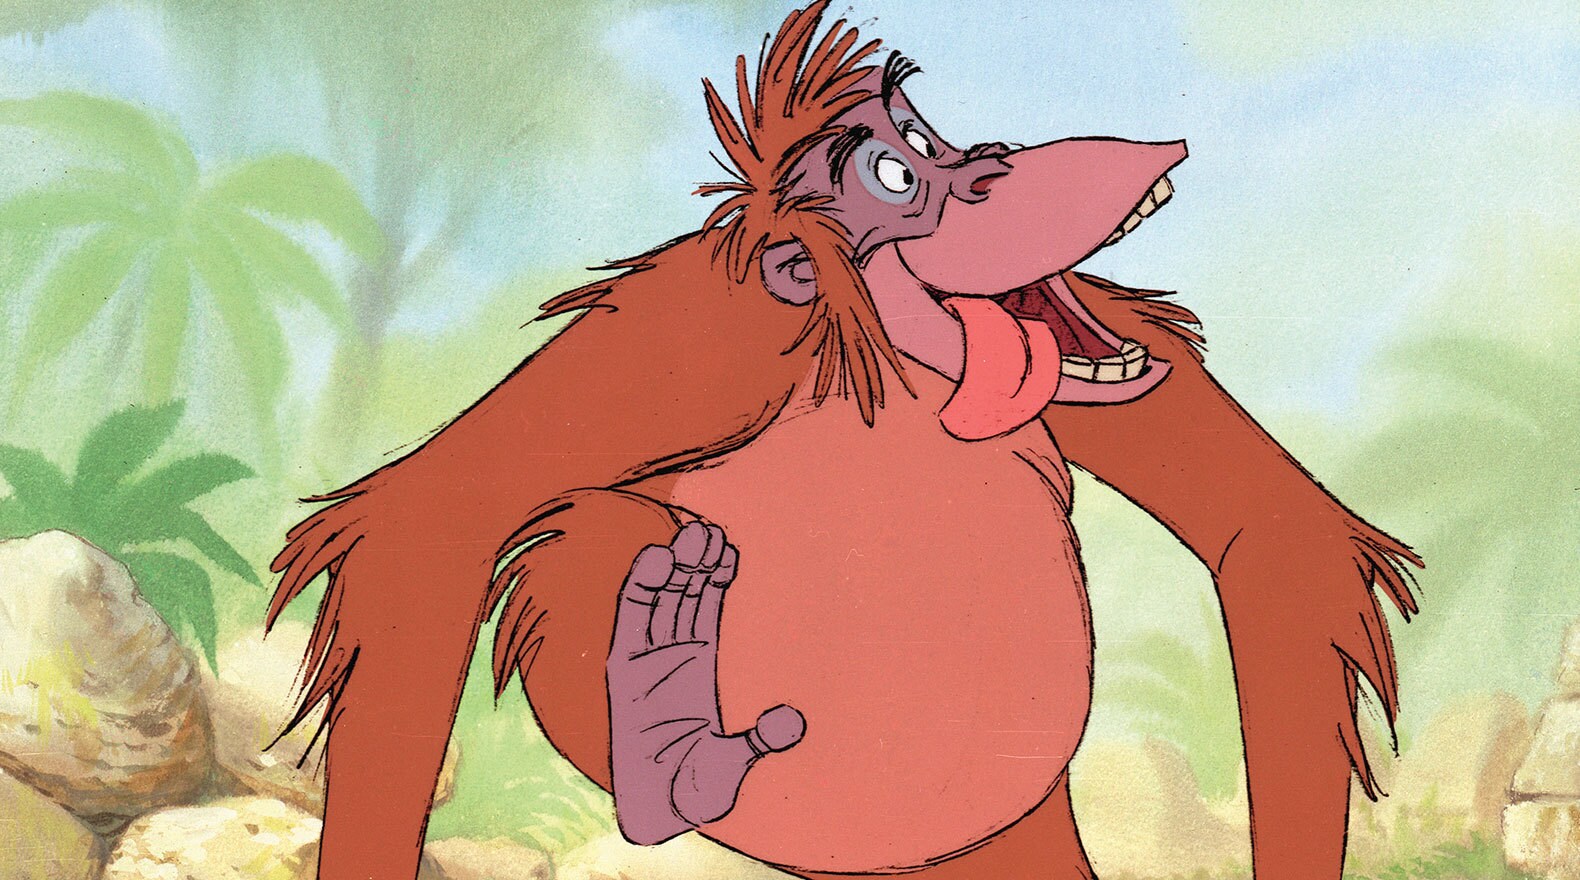 "What I desire is Man's Red Fire to make my dream come true!" King Louie (voice of Louis Prima) from the Disney movie The Jungle Book (1967).